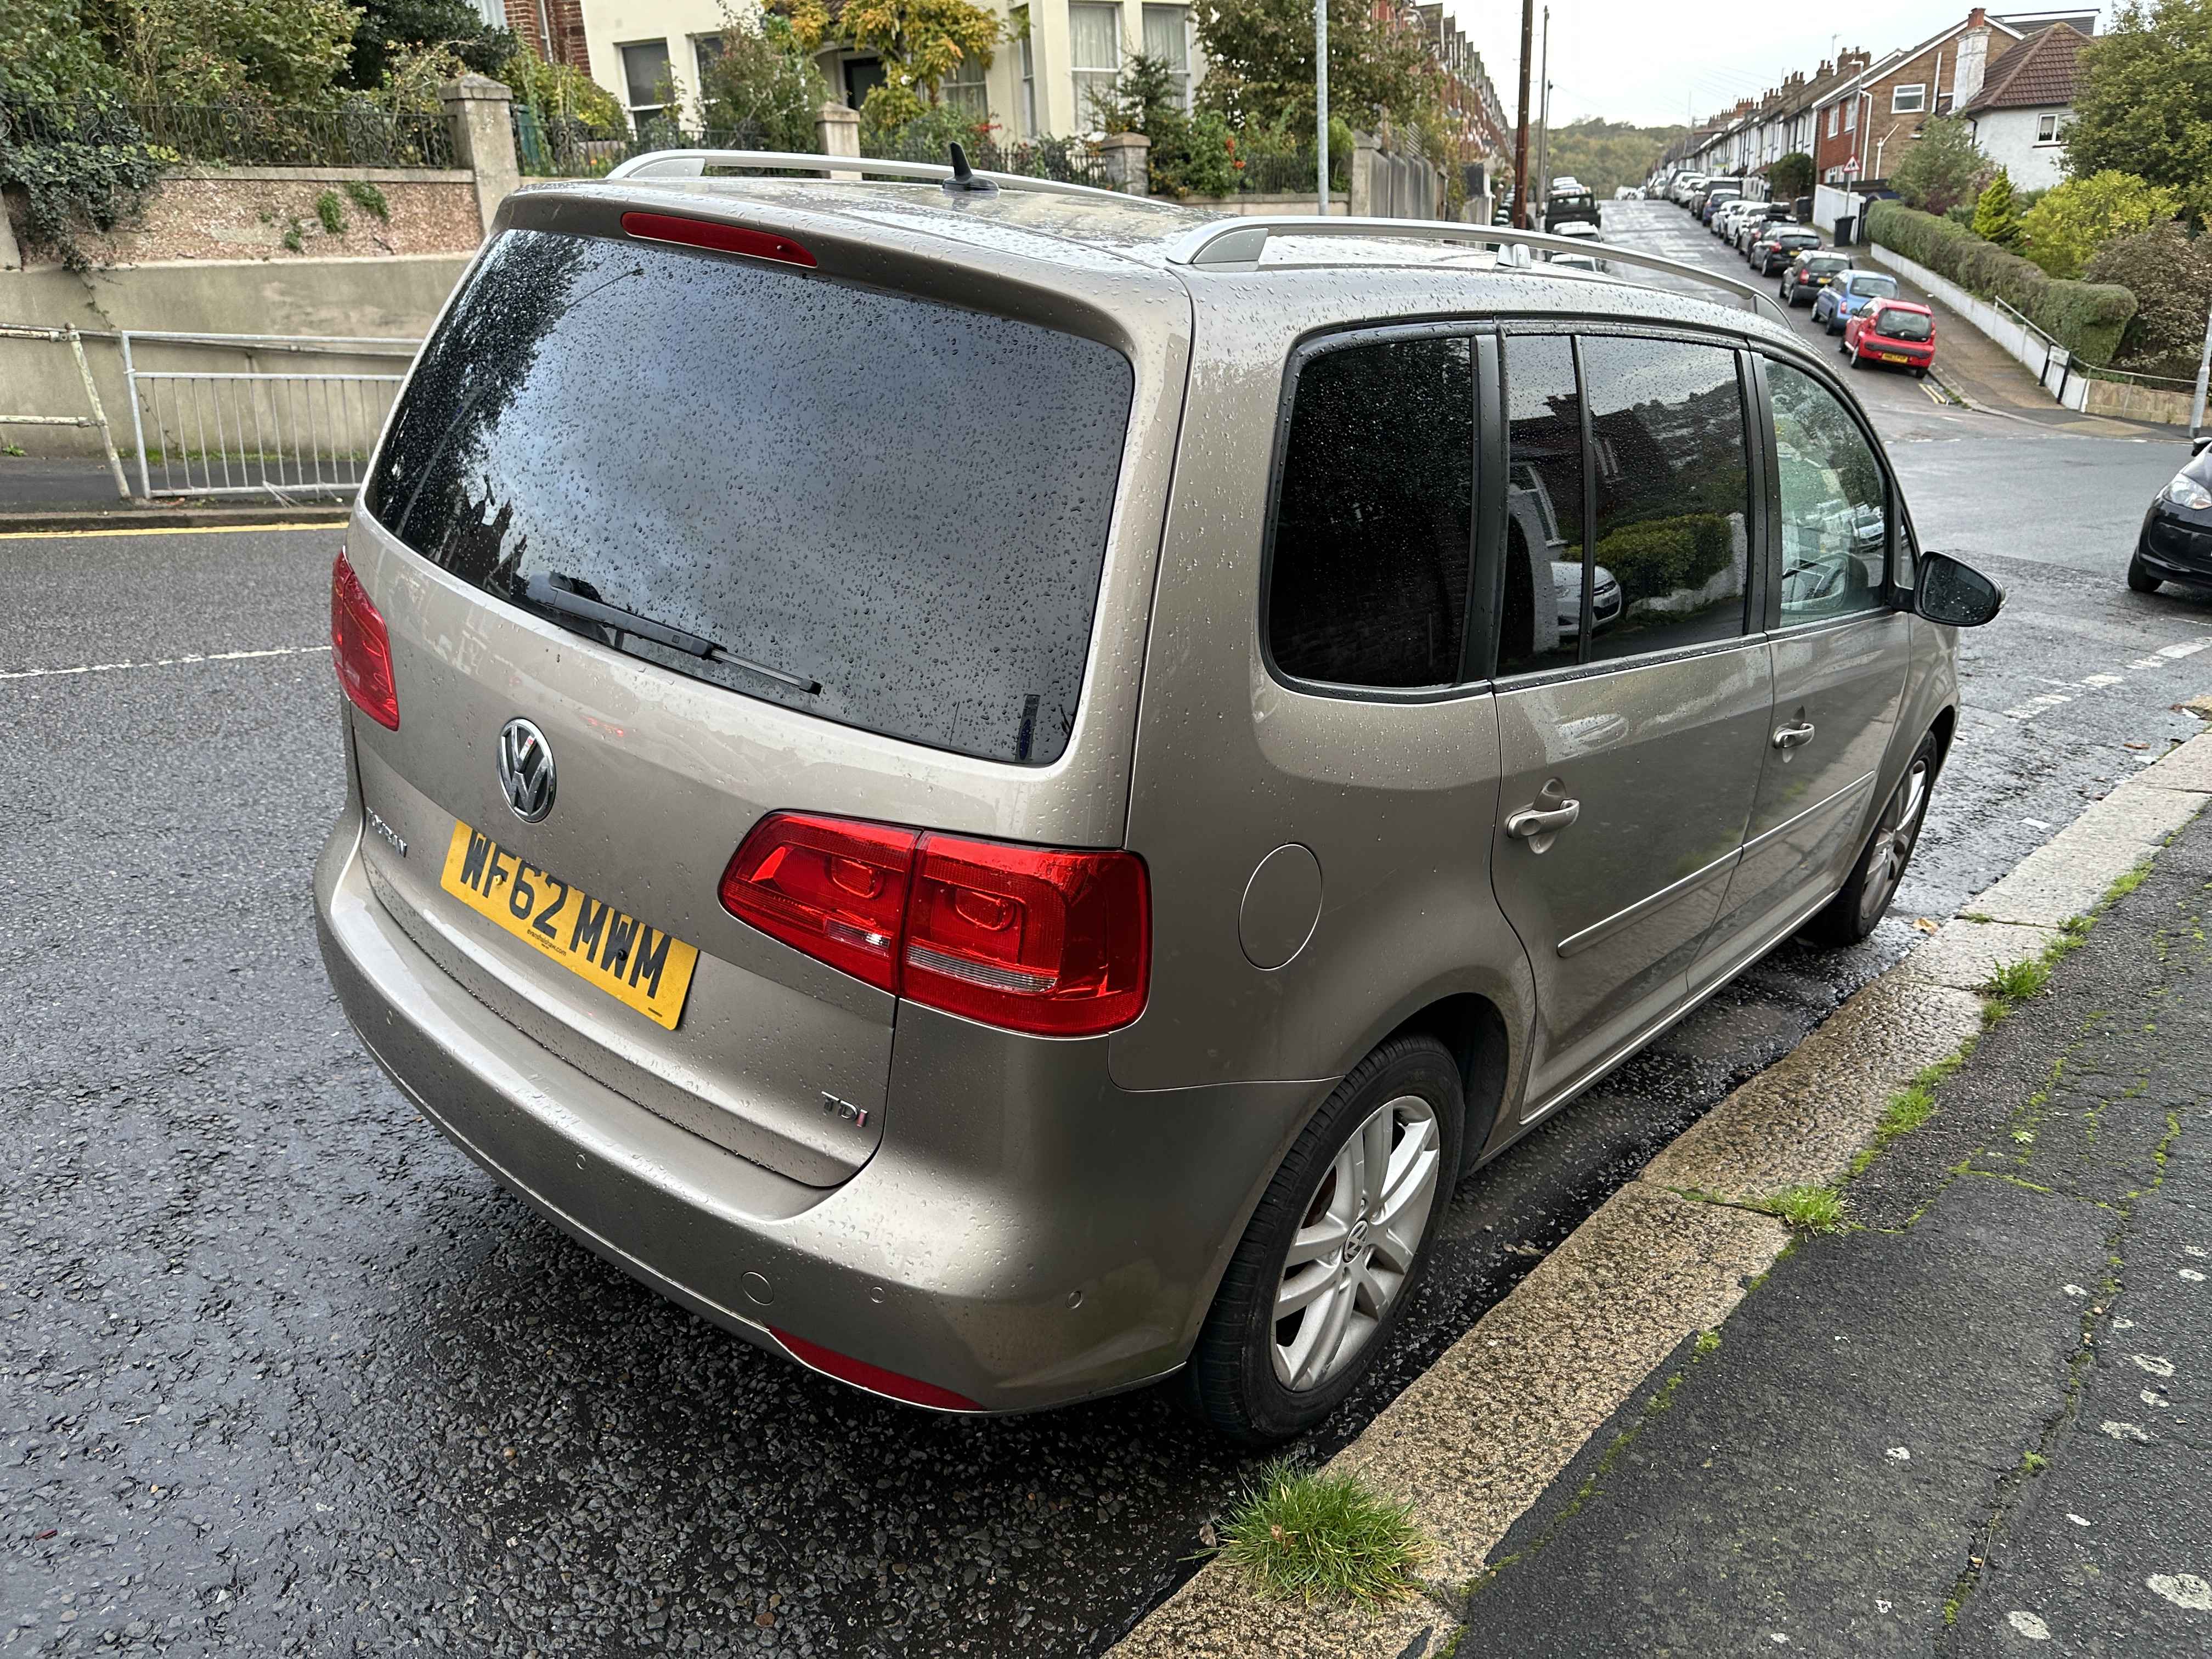 Photograph of WF62 MWM - a Gold Volkswagen Touran parked in Hollingdean by a non-resident. 